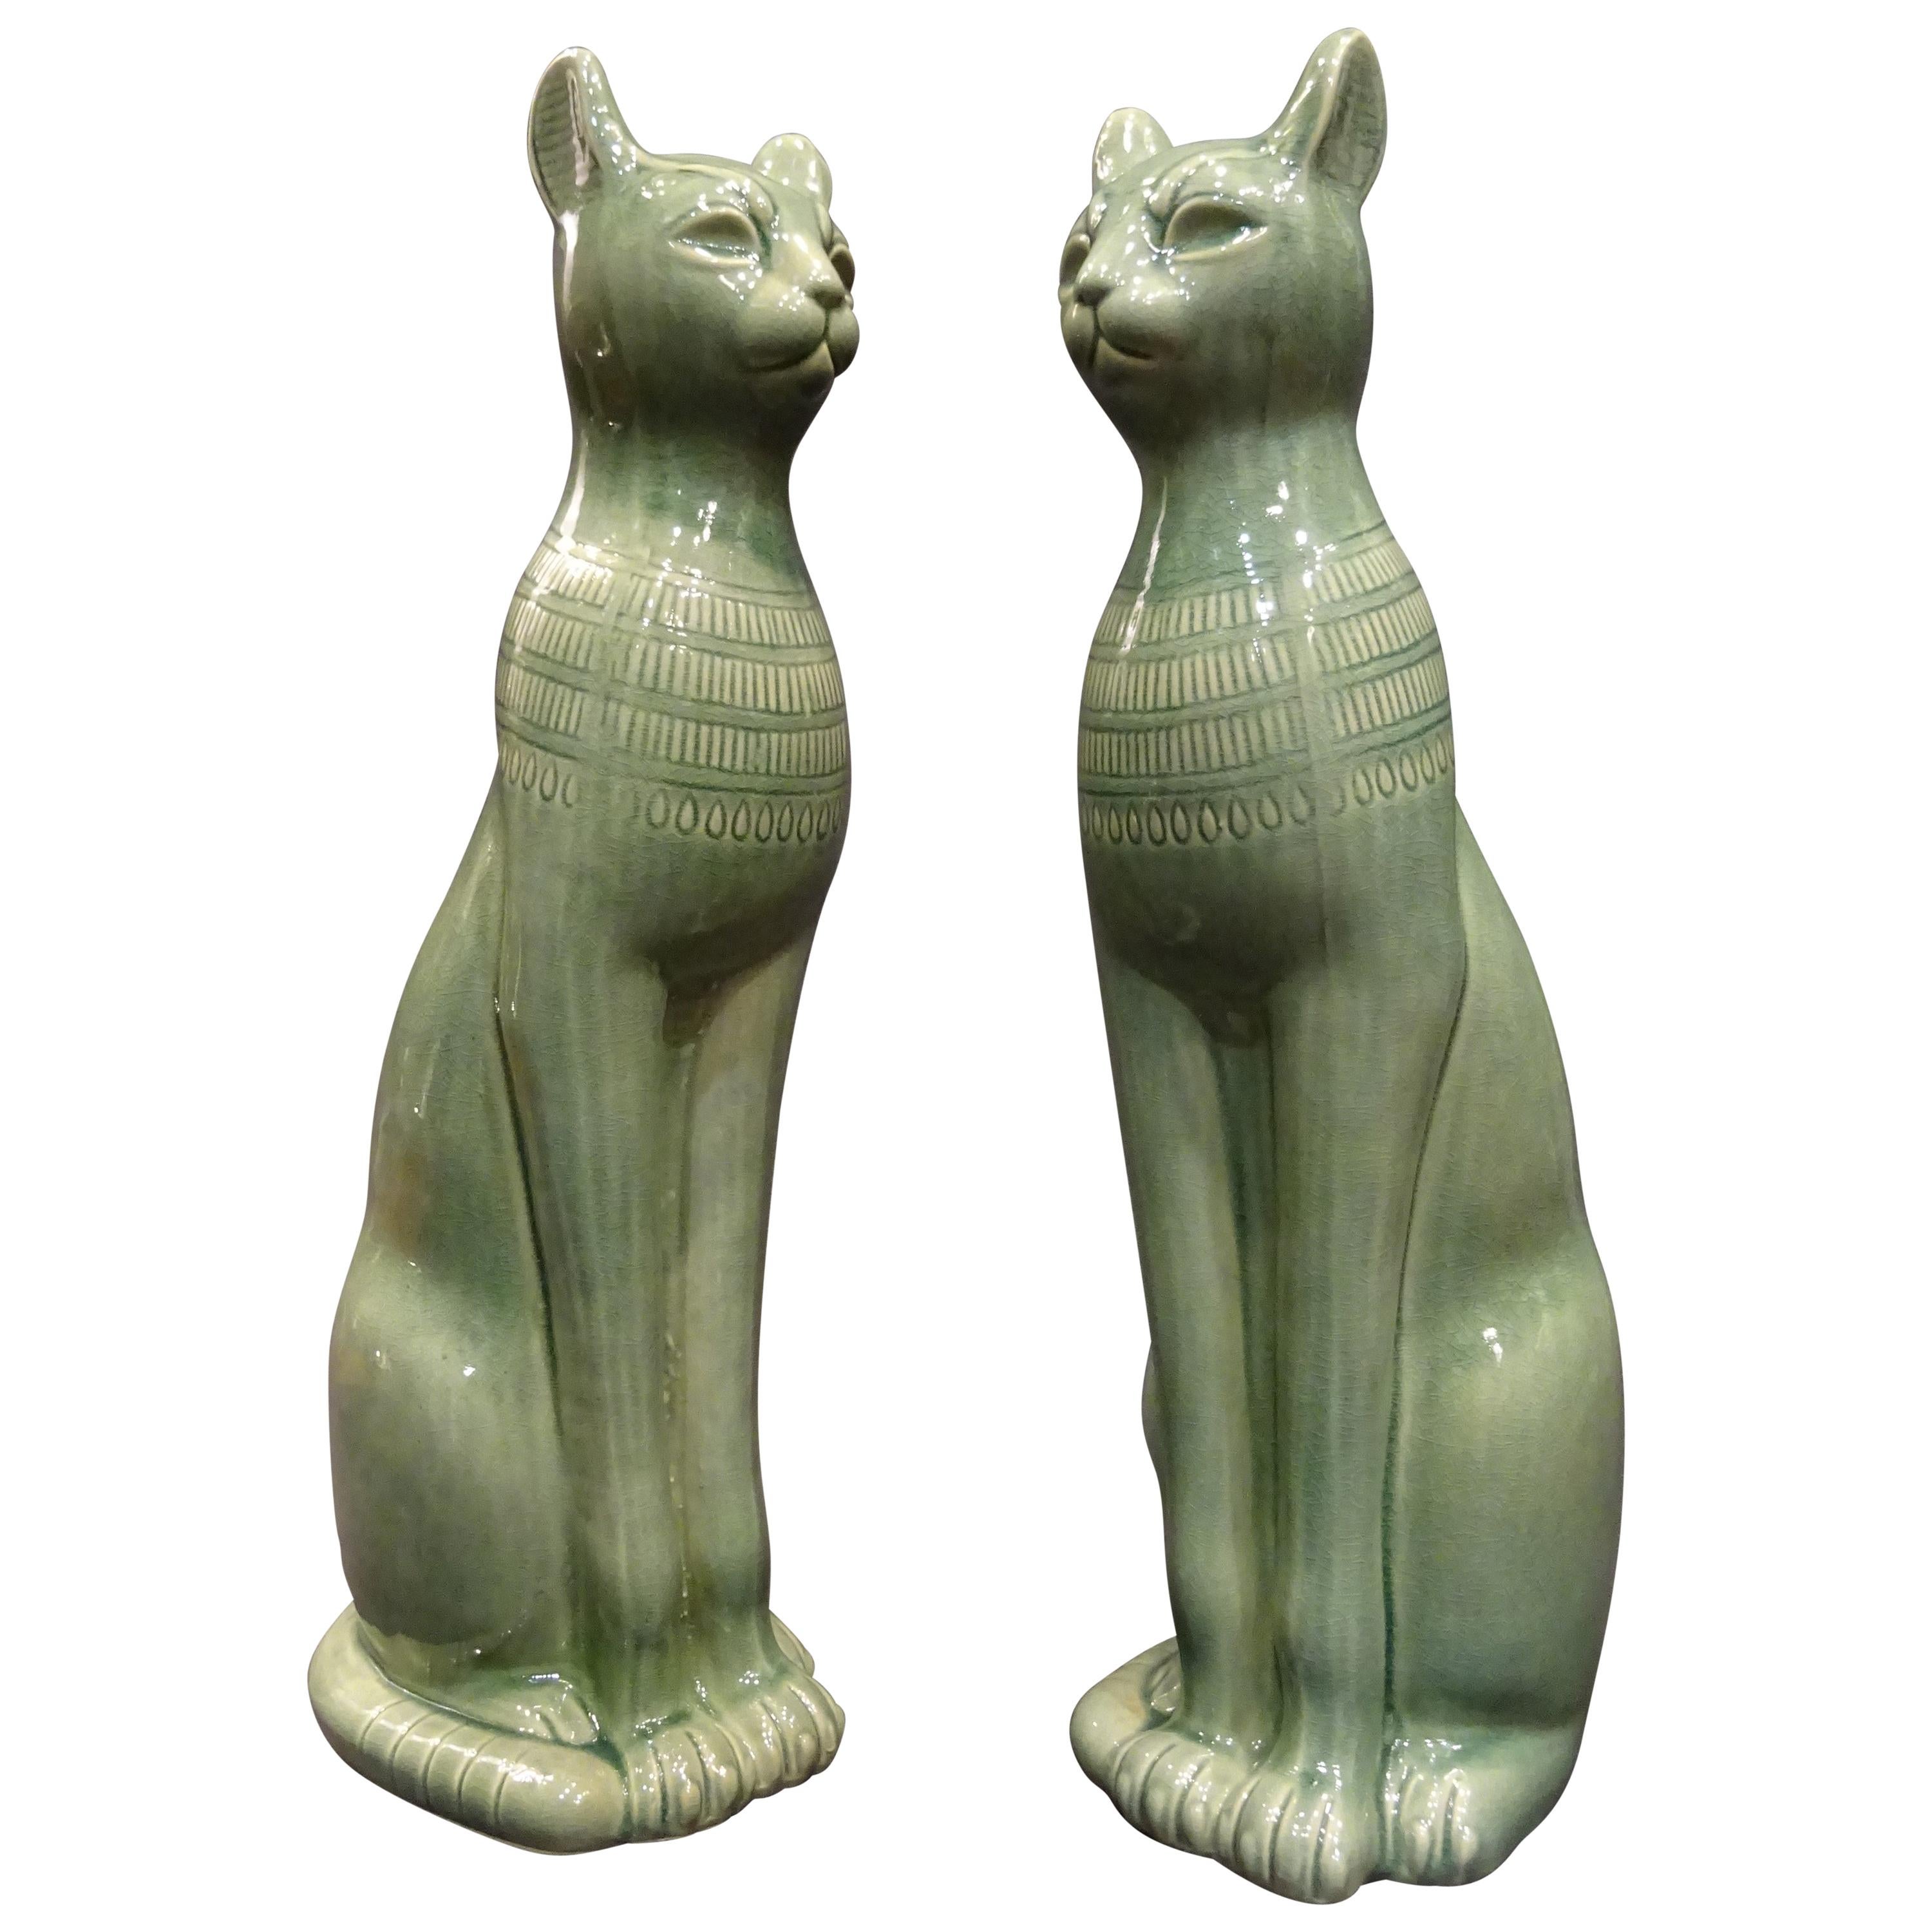 1960s Italy Couple of Cats Sculptures in Celadon Color Ceramic